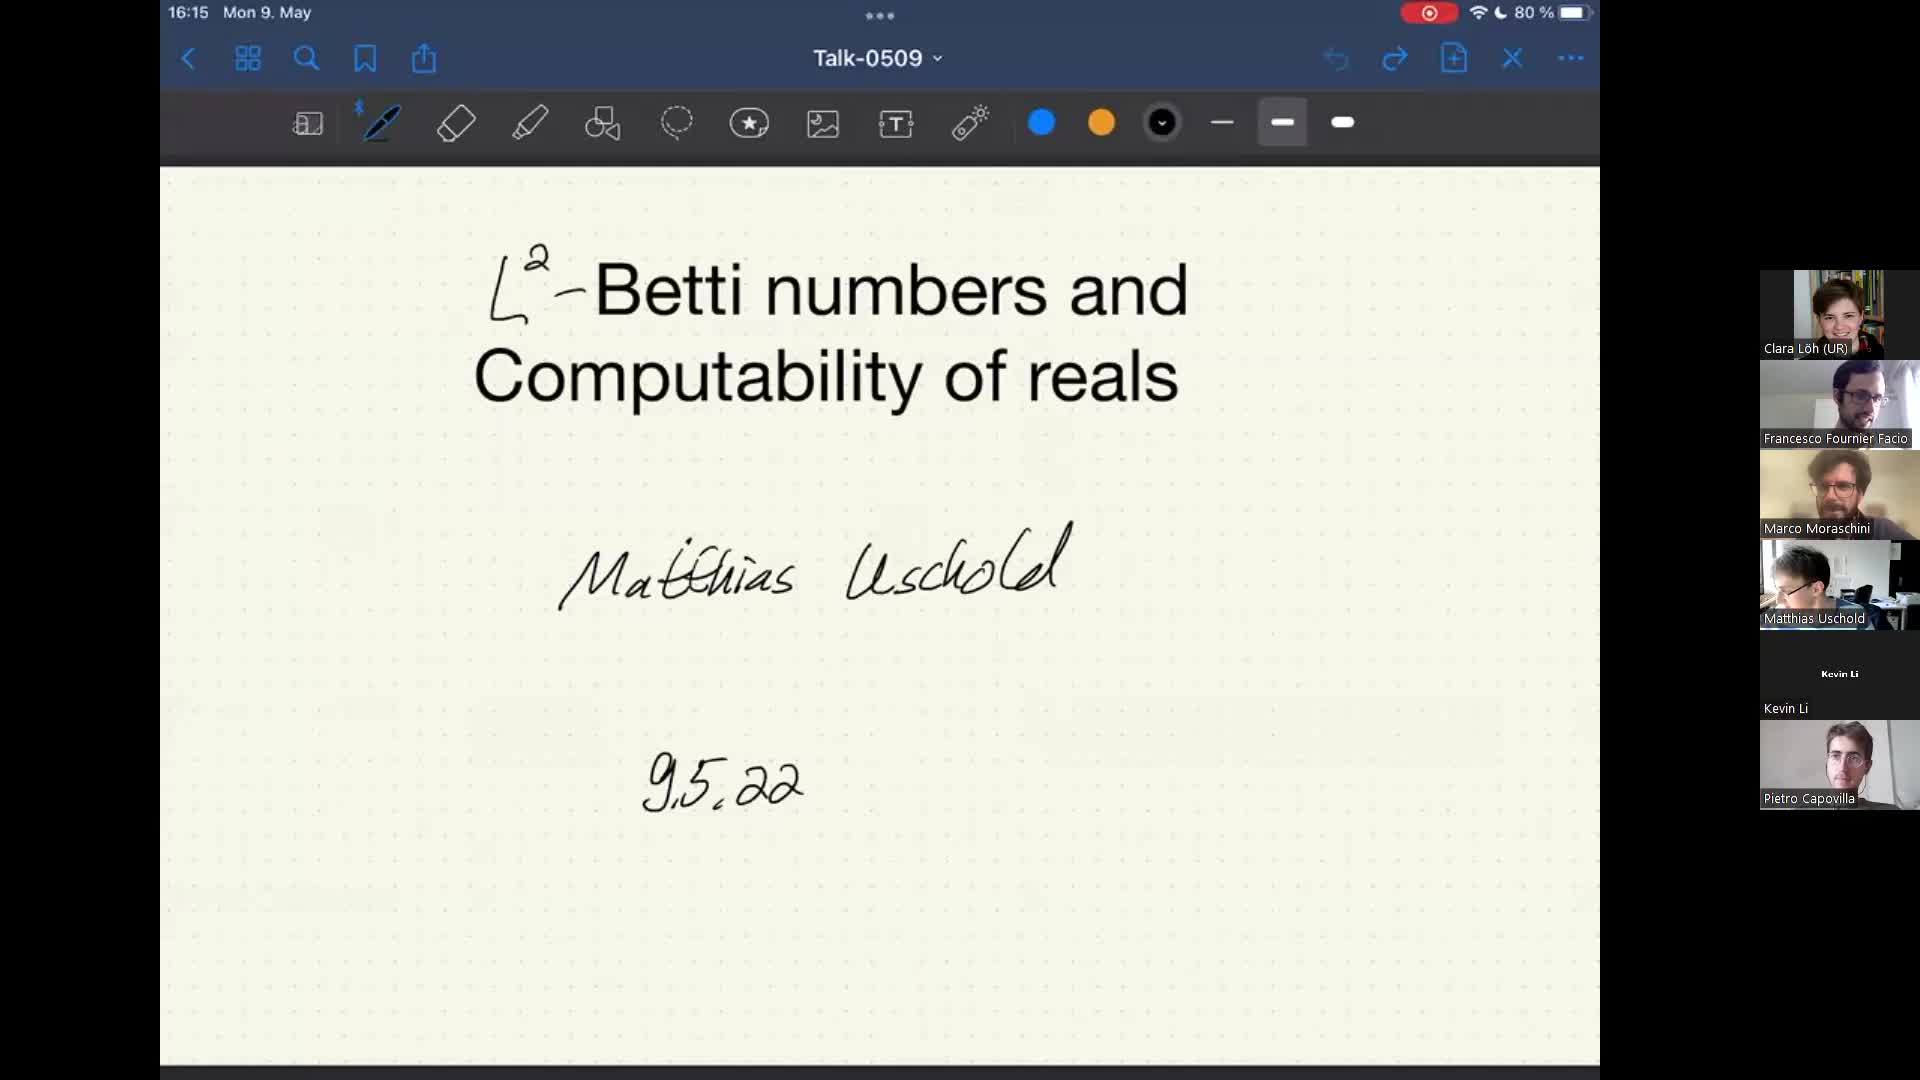 L2-Betti numbers and computability of reals